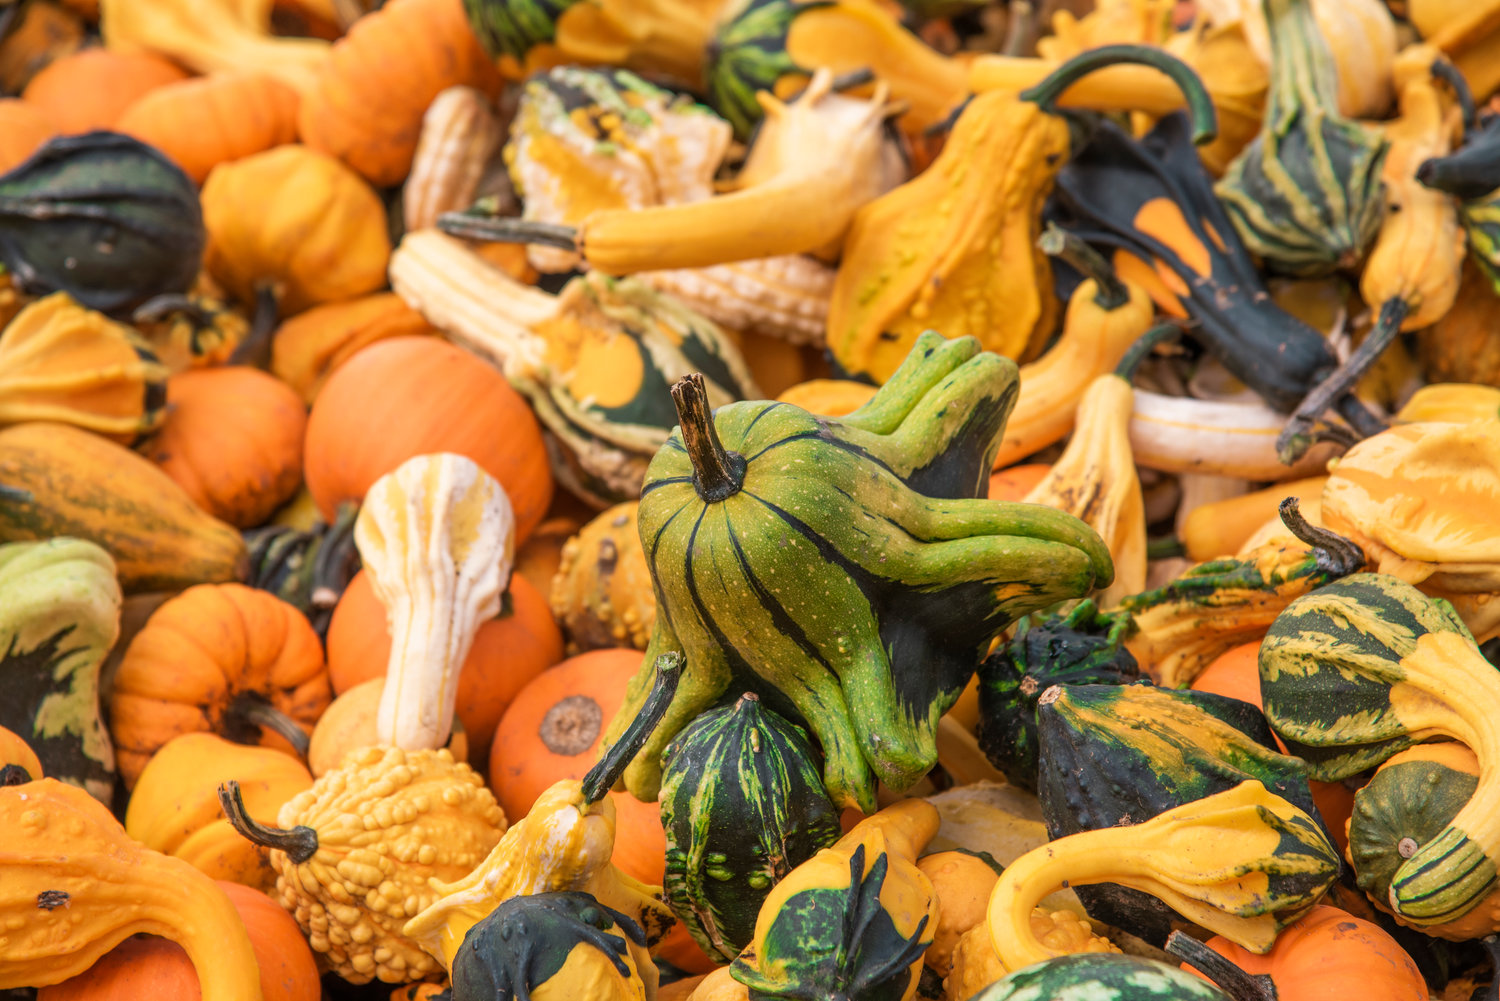 Decorative gourds fill a display at The Huntting’s Farm in Cinebar on Wednesday.